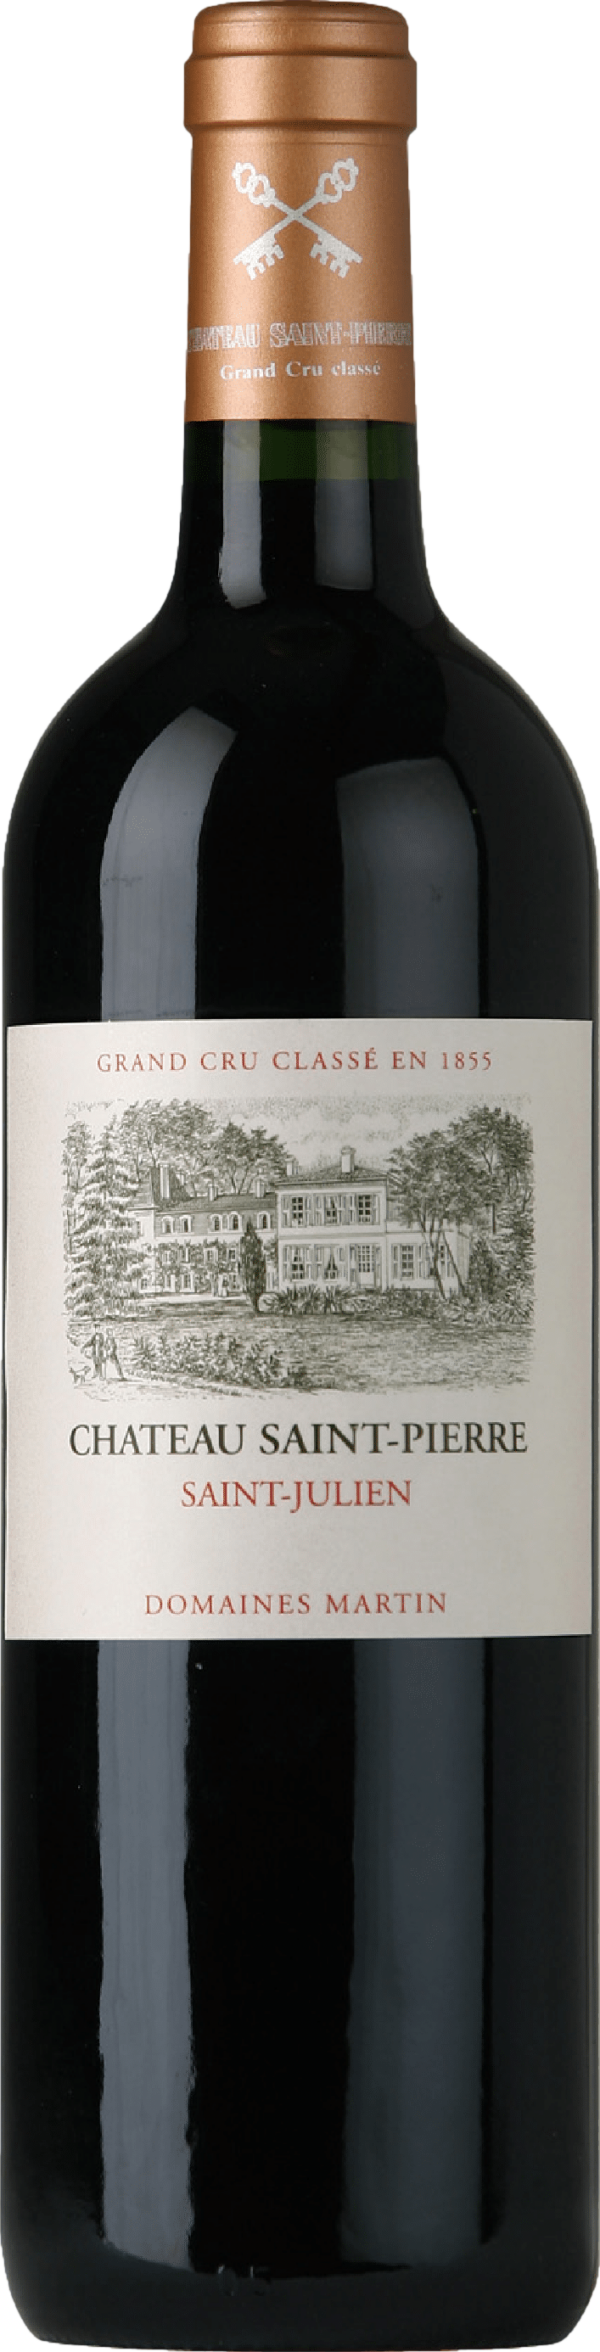 Product image of Chateau Saint-Pierre Saint Julien 2013 from 8wines